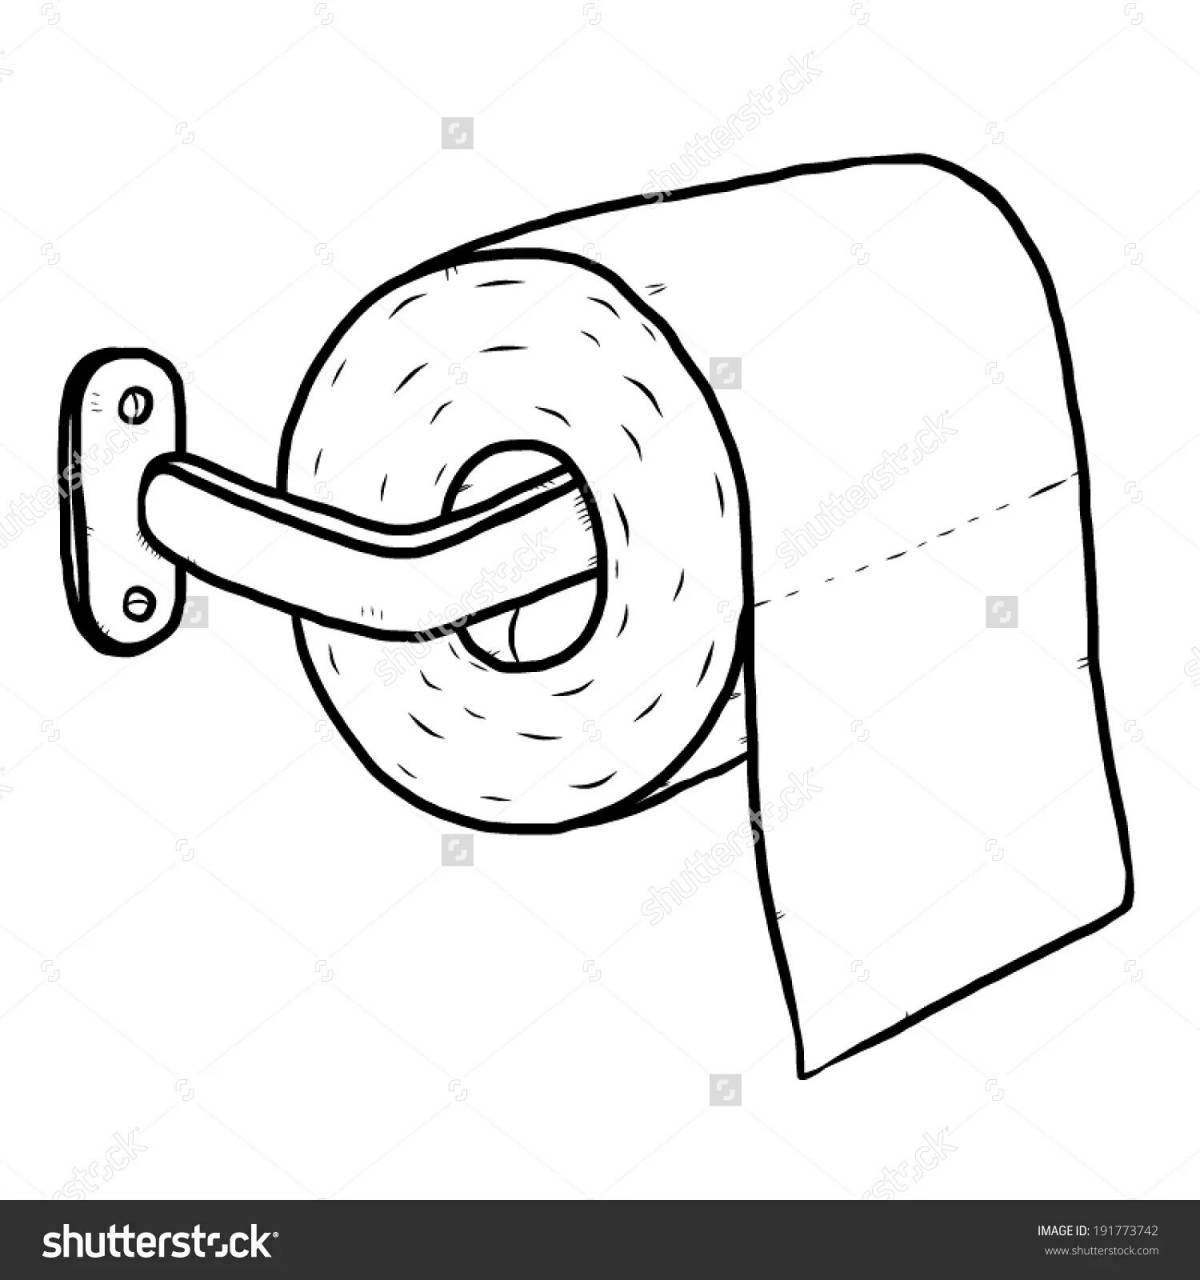 Colorful toilet paper coloring page